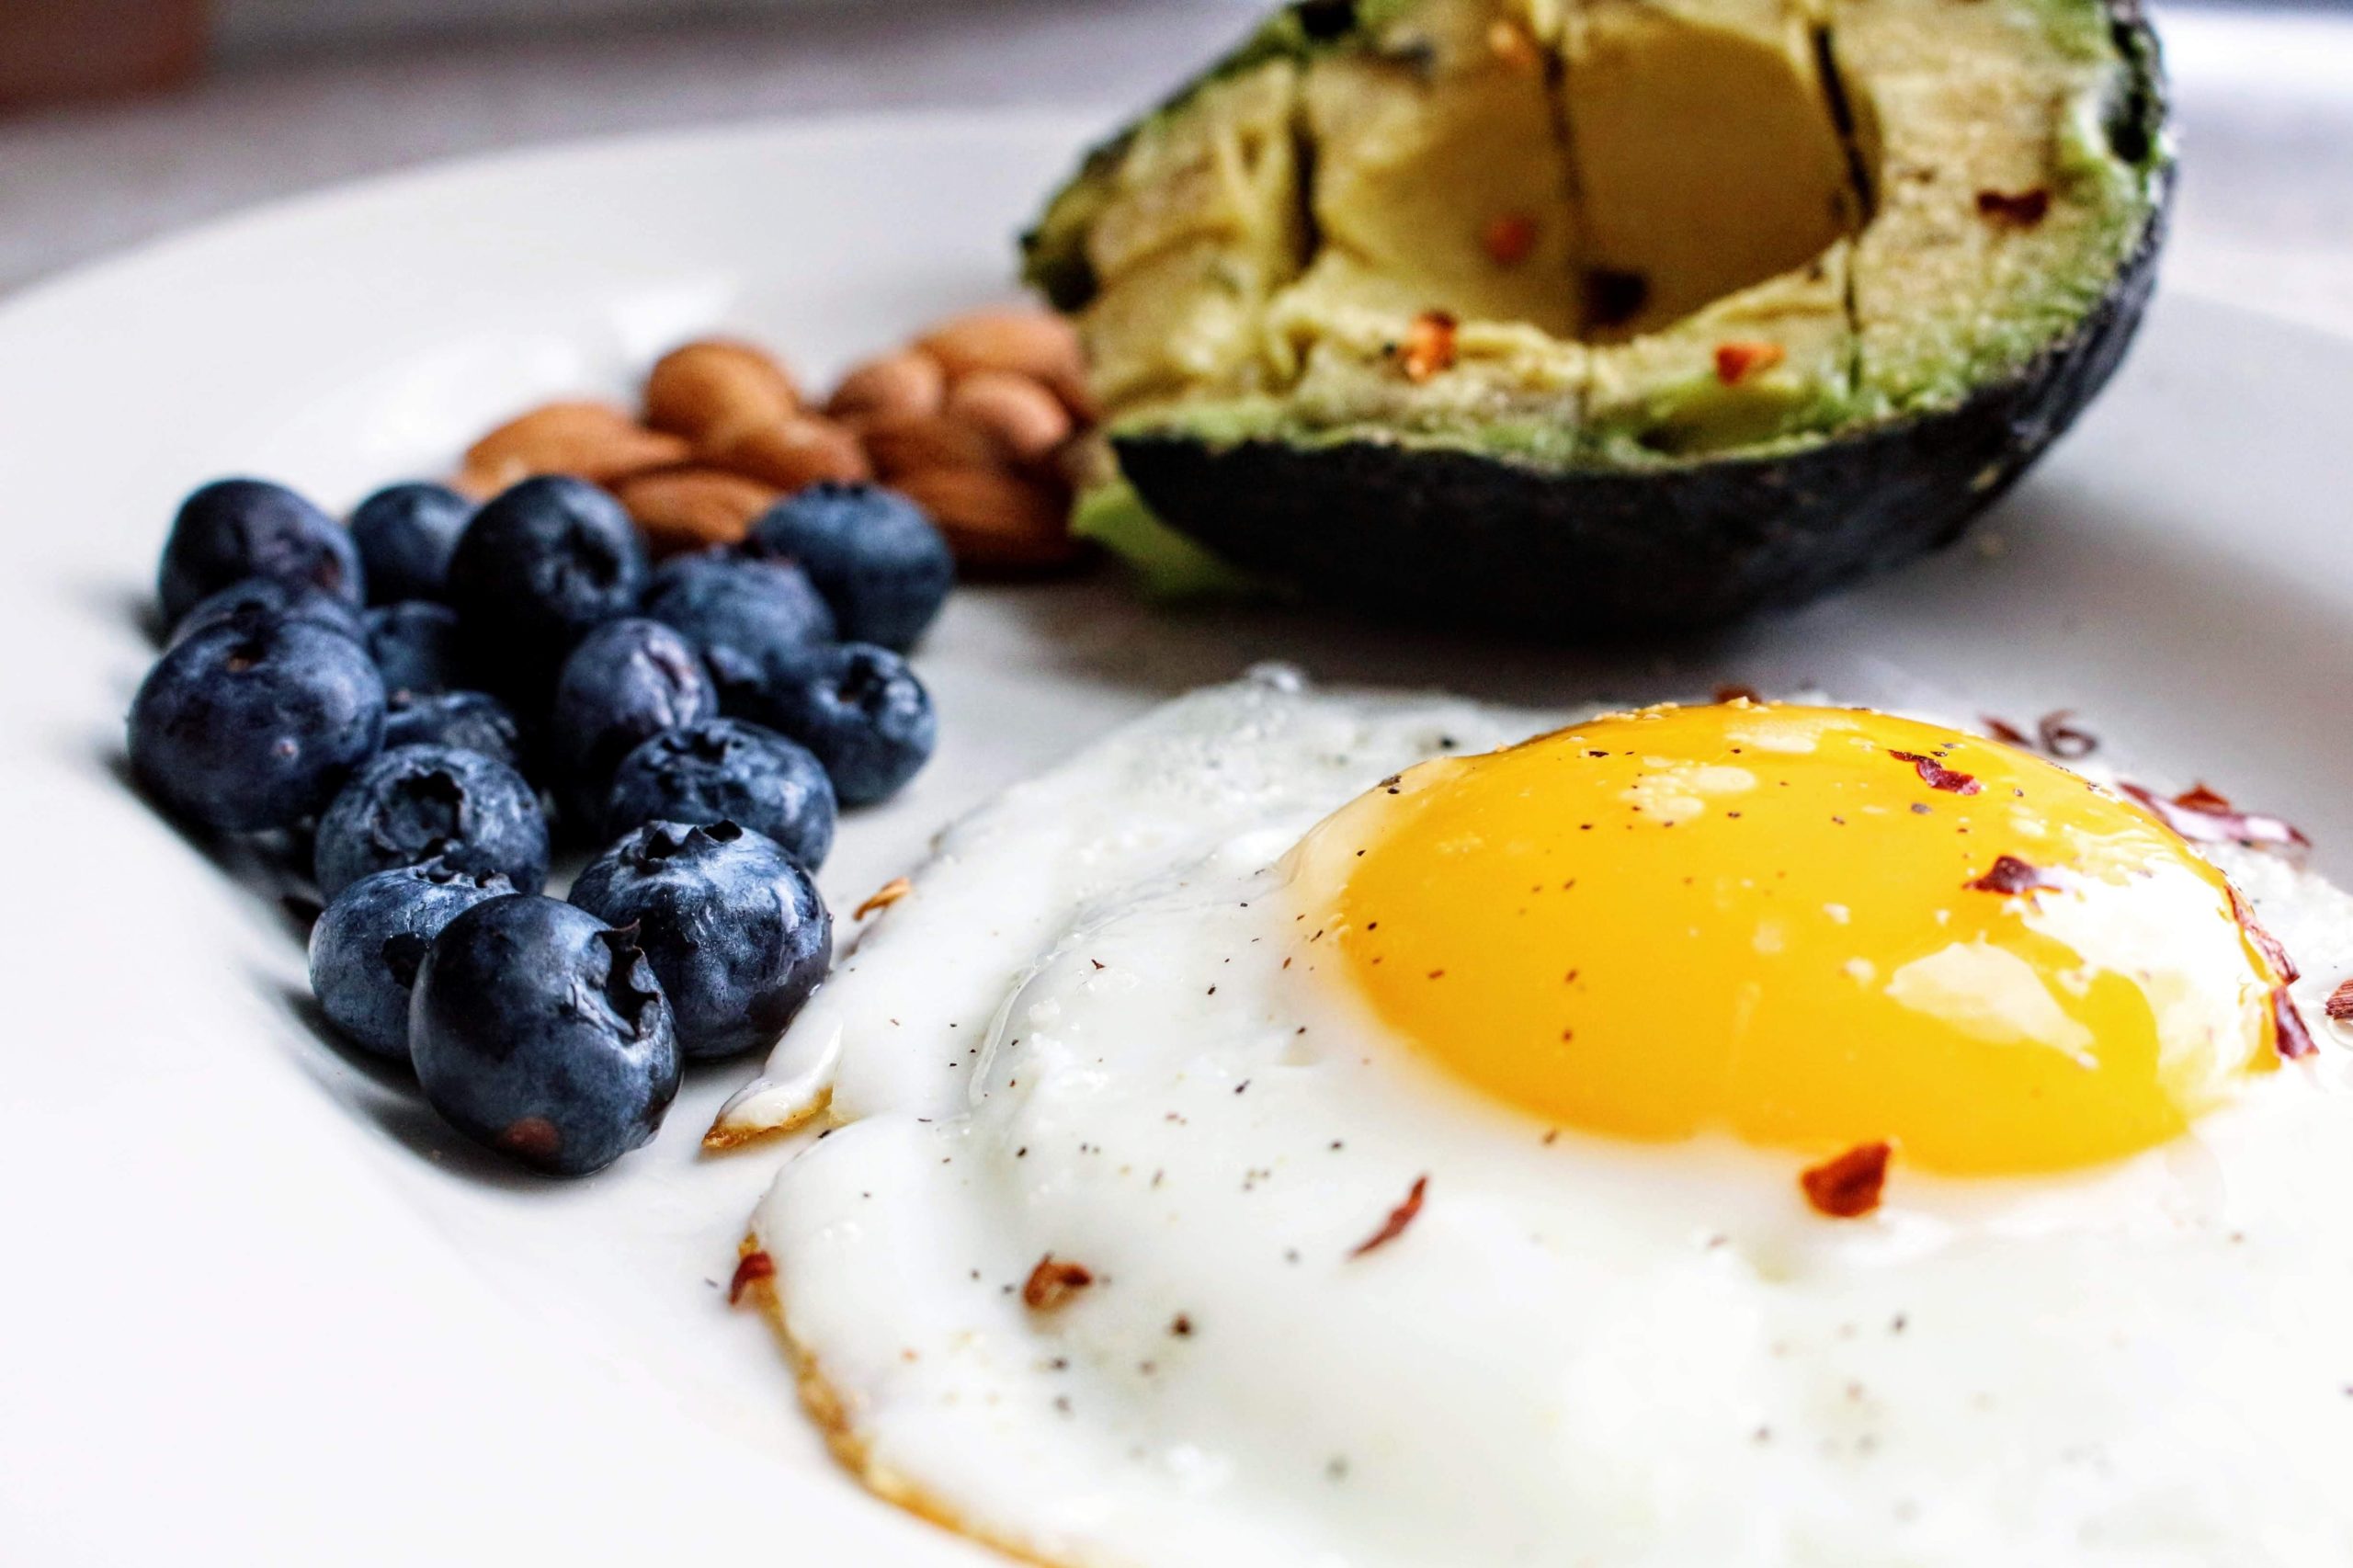 Canva Egg with Blueberries